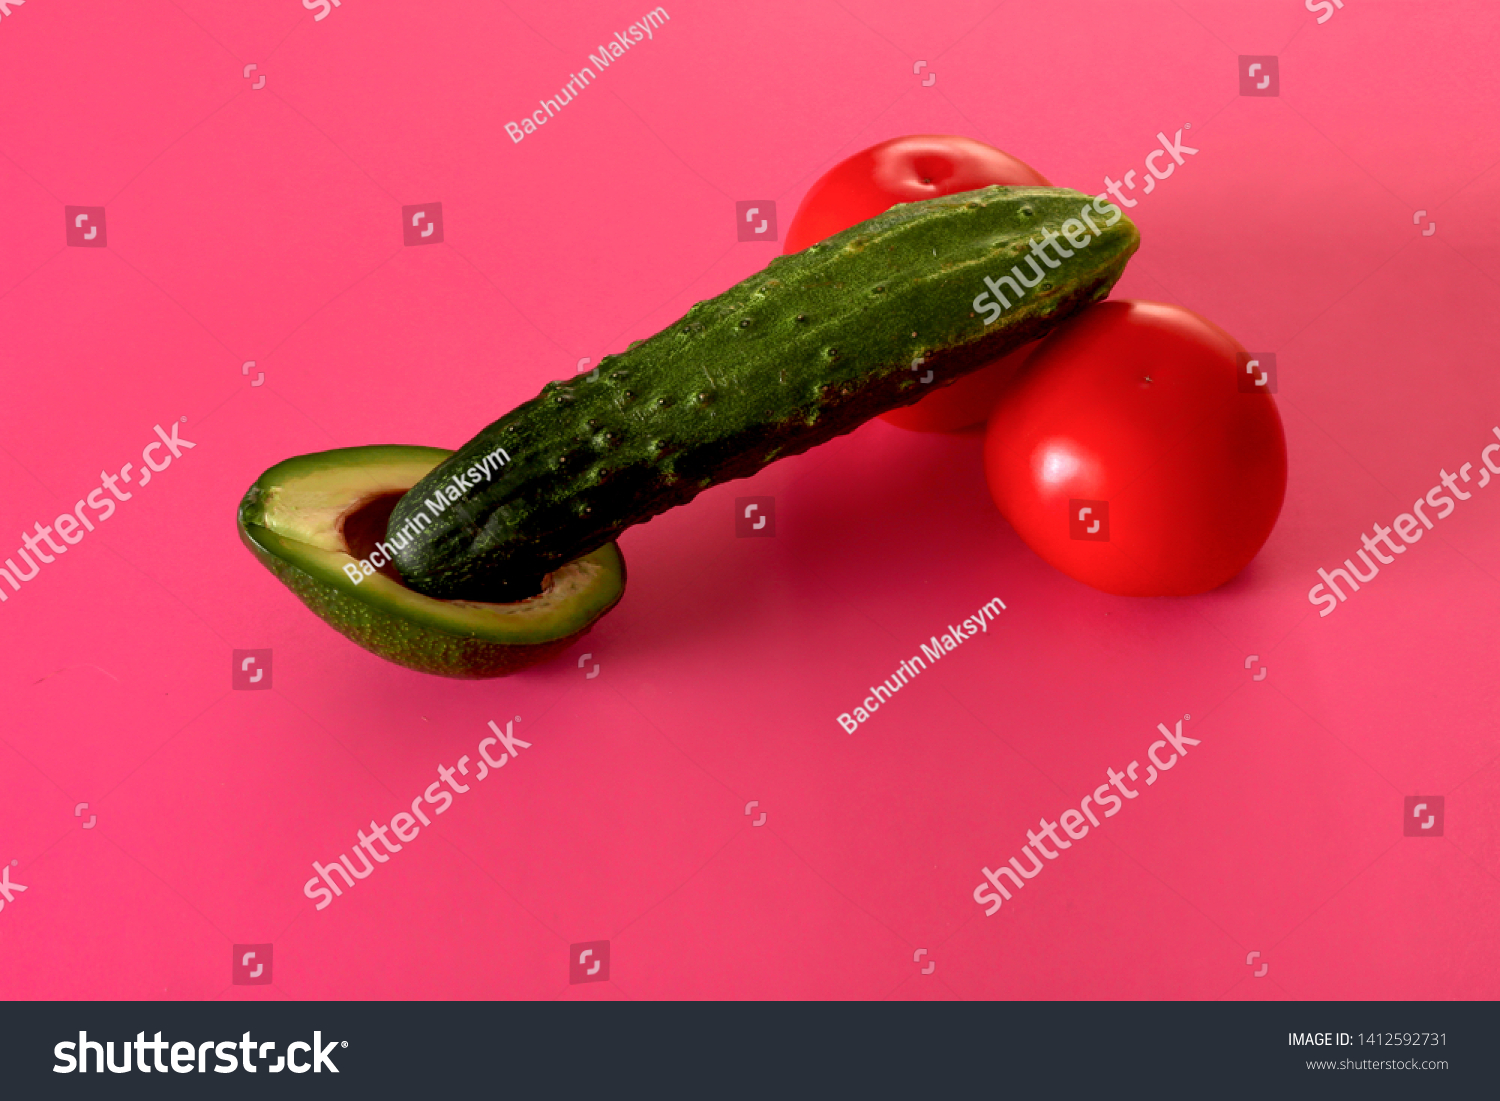 Sexy Sexually Erotic Food Sex Porn Stock Photo Shutterstock